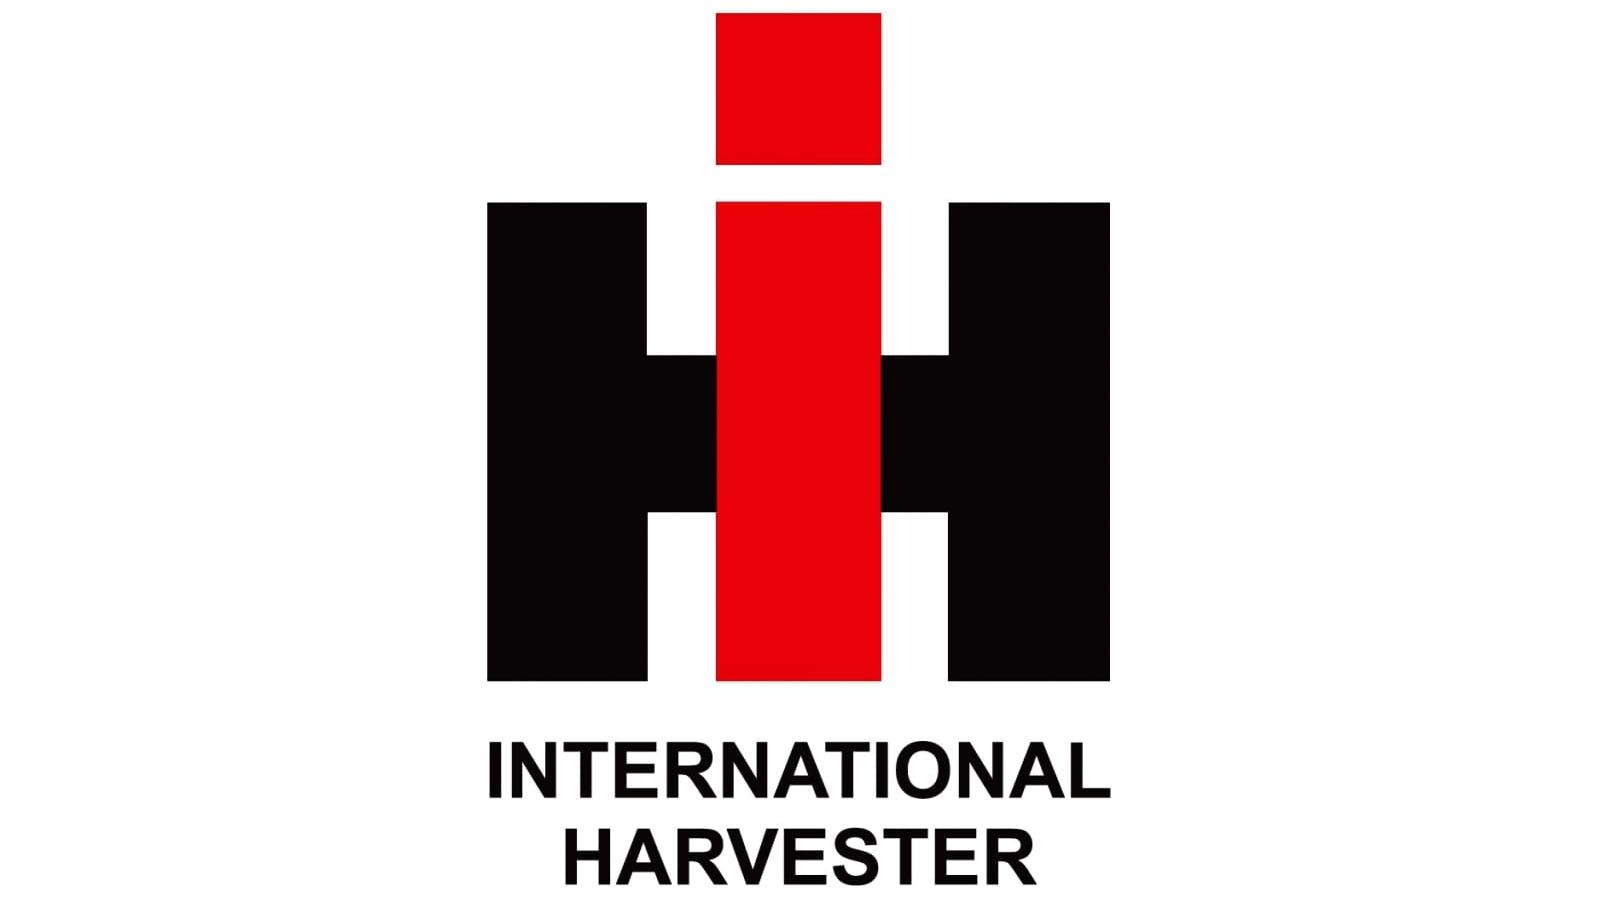 International Harvester will be celebrated Aug. 5-6 at their former campus.